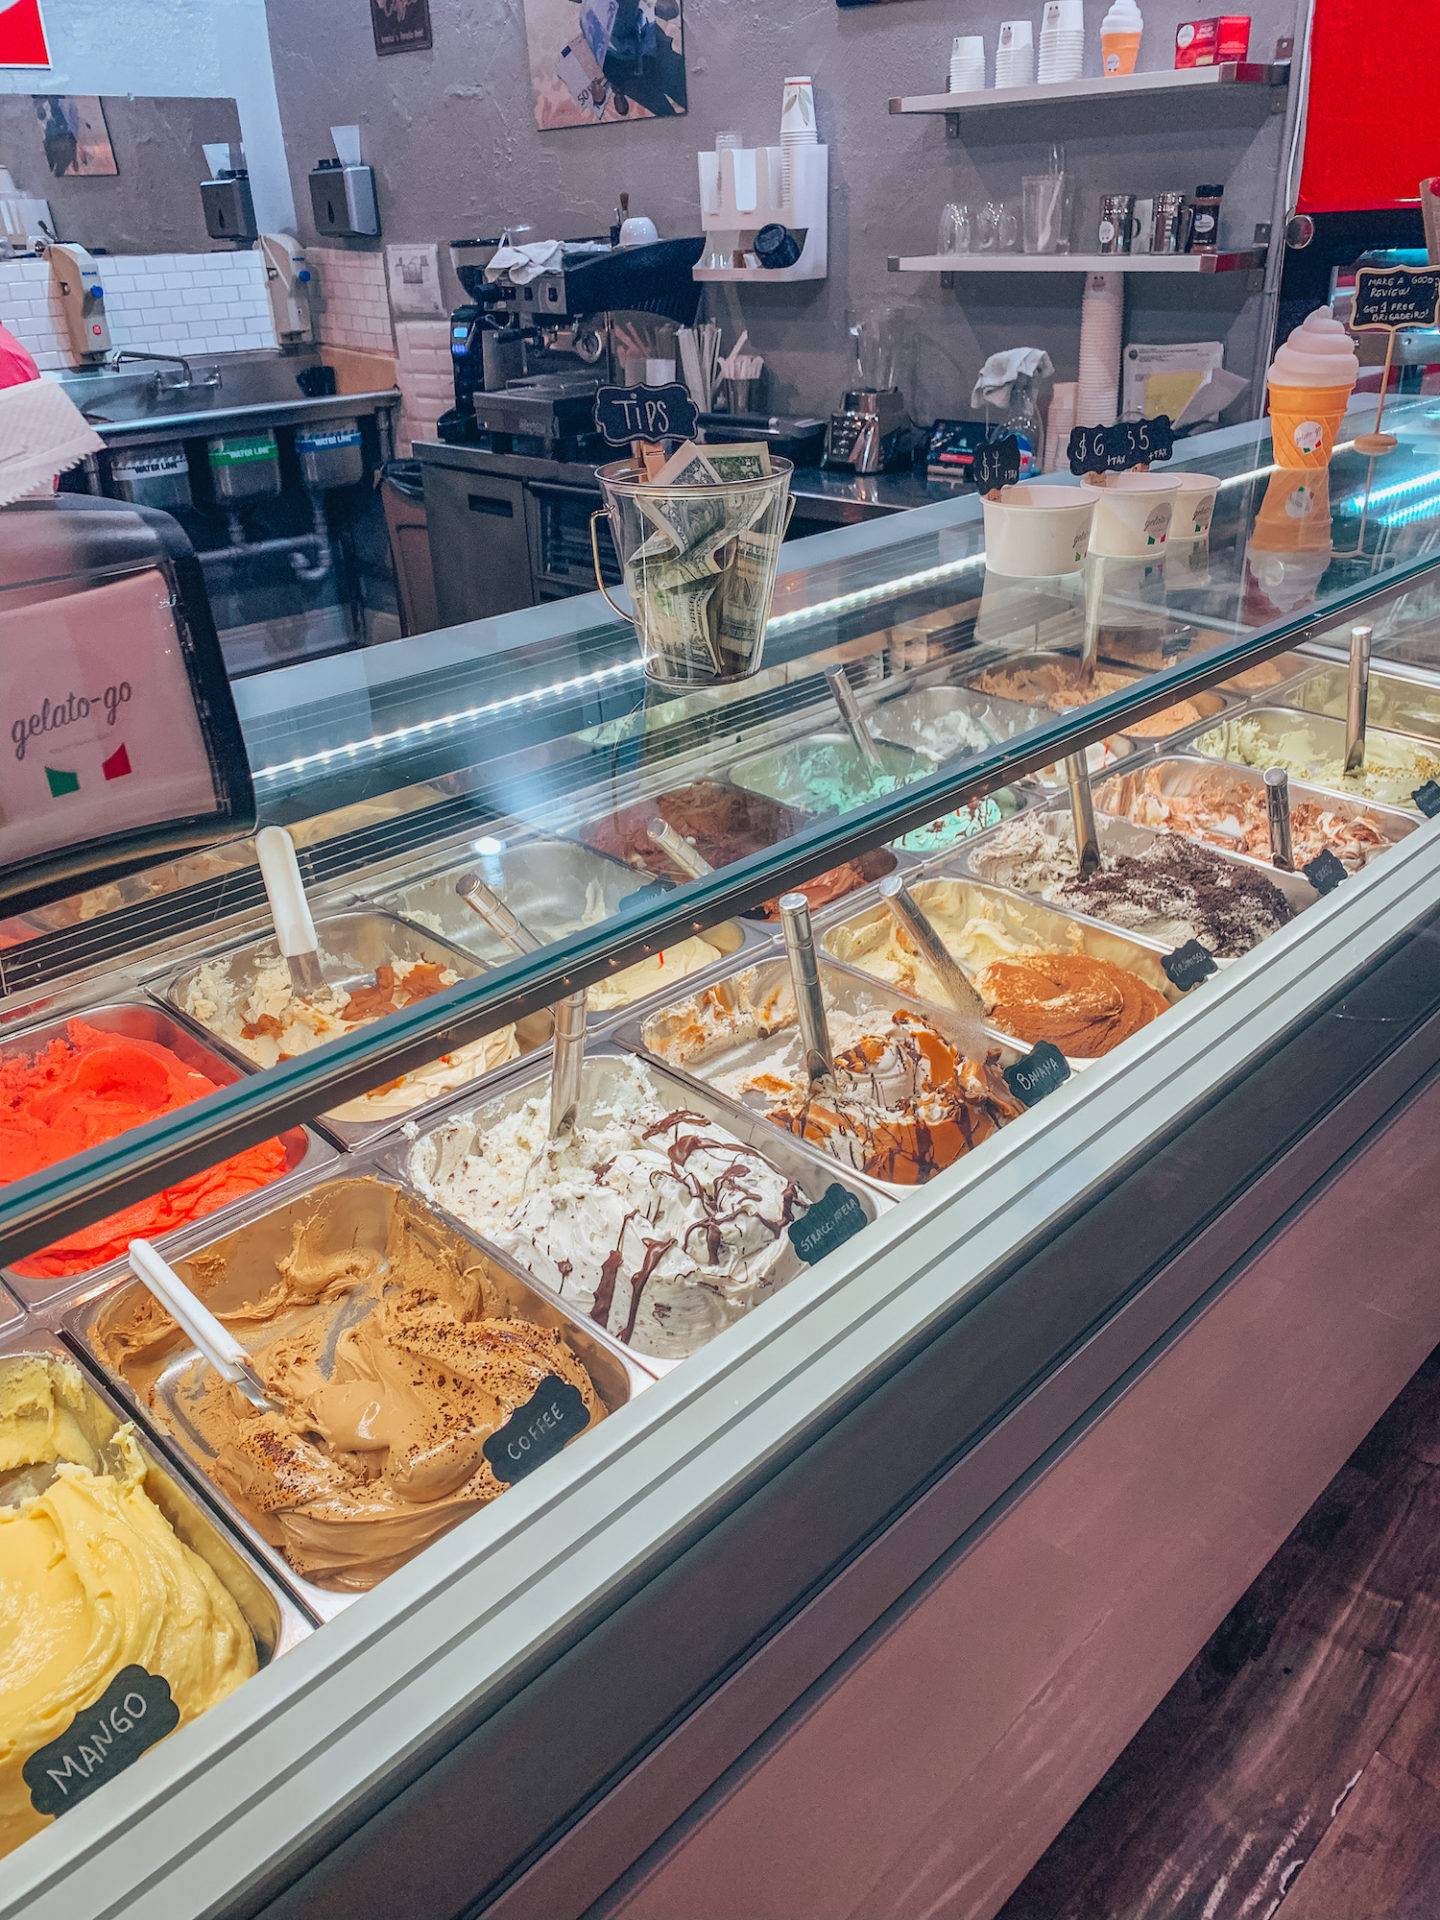 The gelaterie across the street from Hosteria Romana in South Beach is a great spot to end the night with a sweet treat.